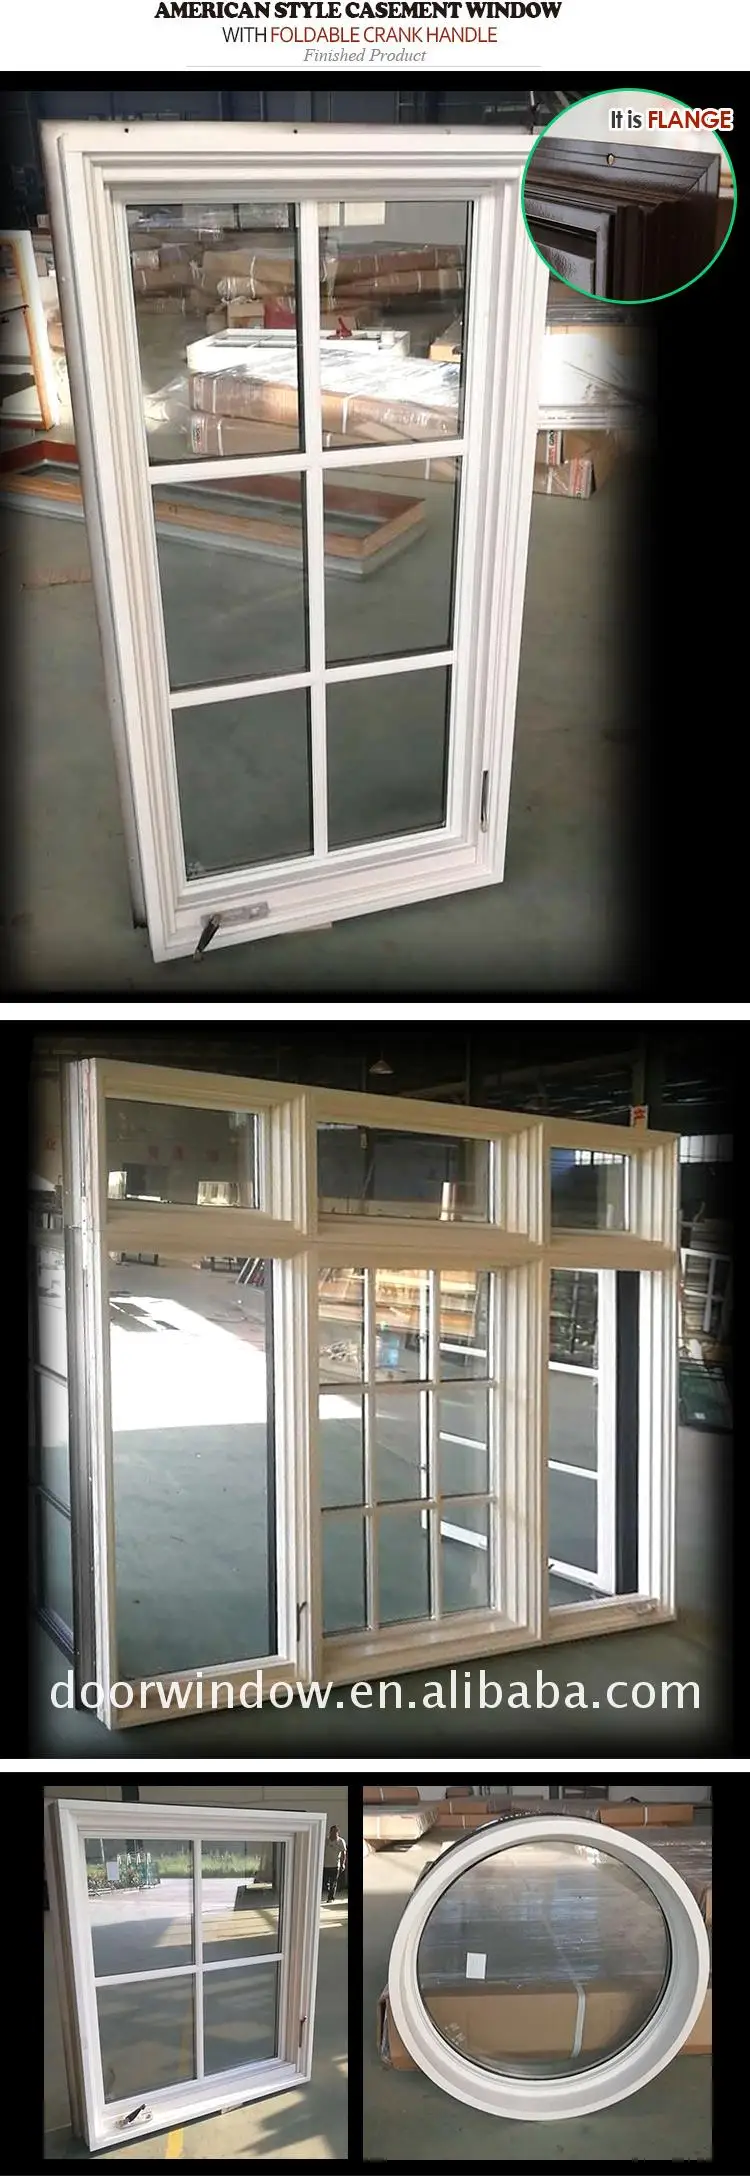 Most selling products new window grill design modern wooden windows